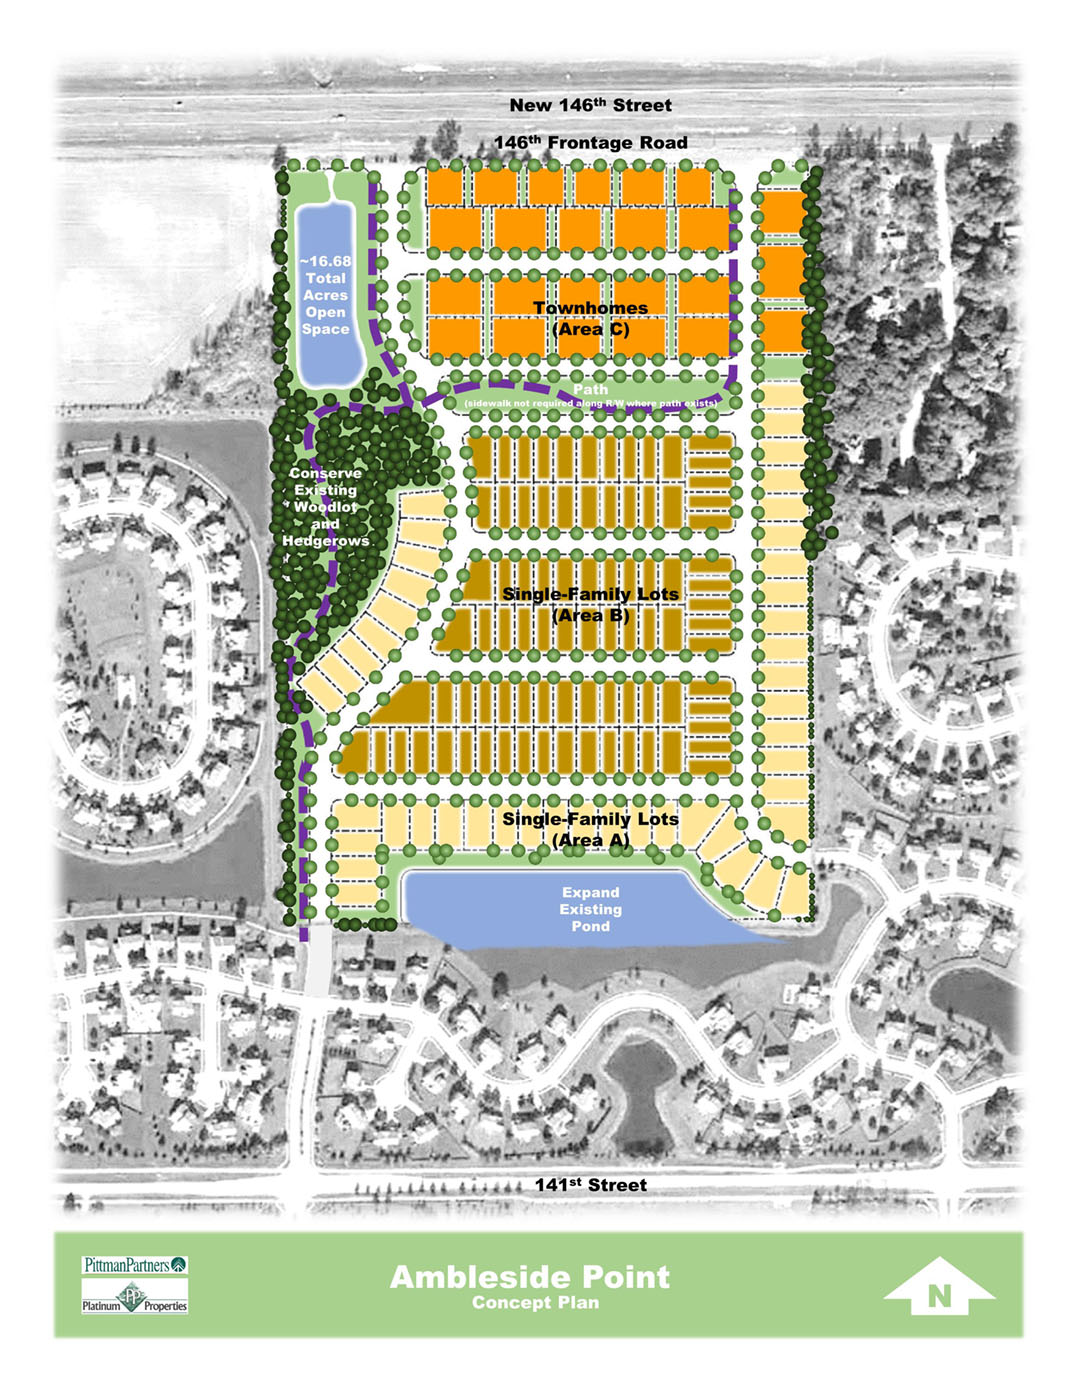 Lack of green space concerns residents near proposed 285-dwelling neighborhood